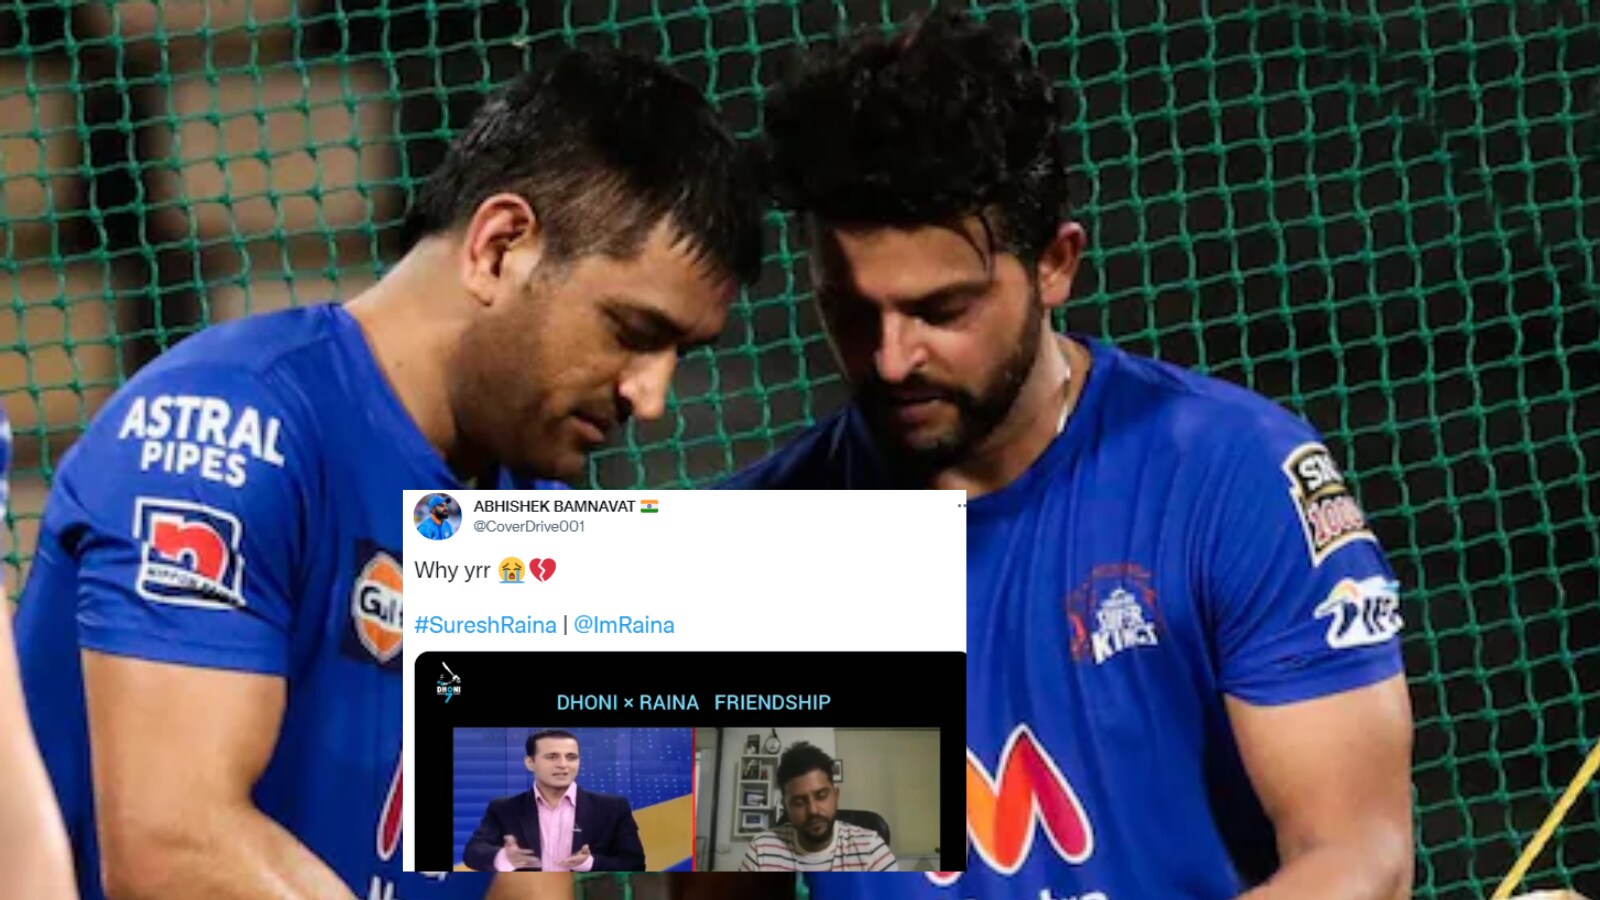 Are bhai kehna kya chahte ho' - Half of Twitter confused, other half likes  DC's new 'Rainbow jersey' for CSK clash